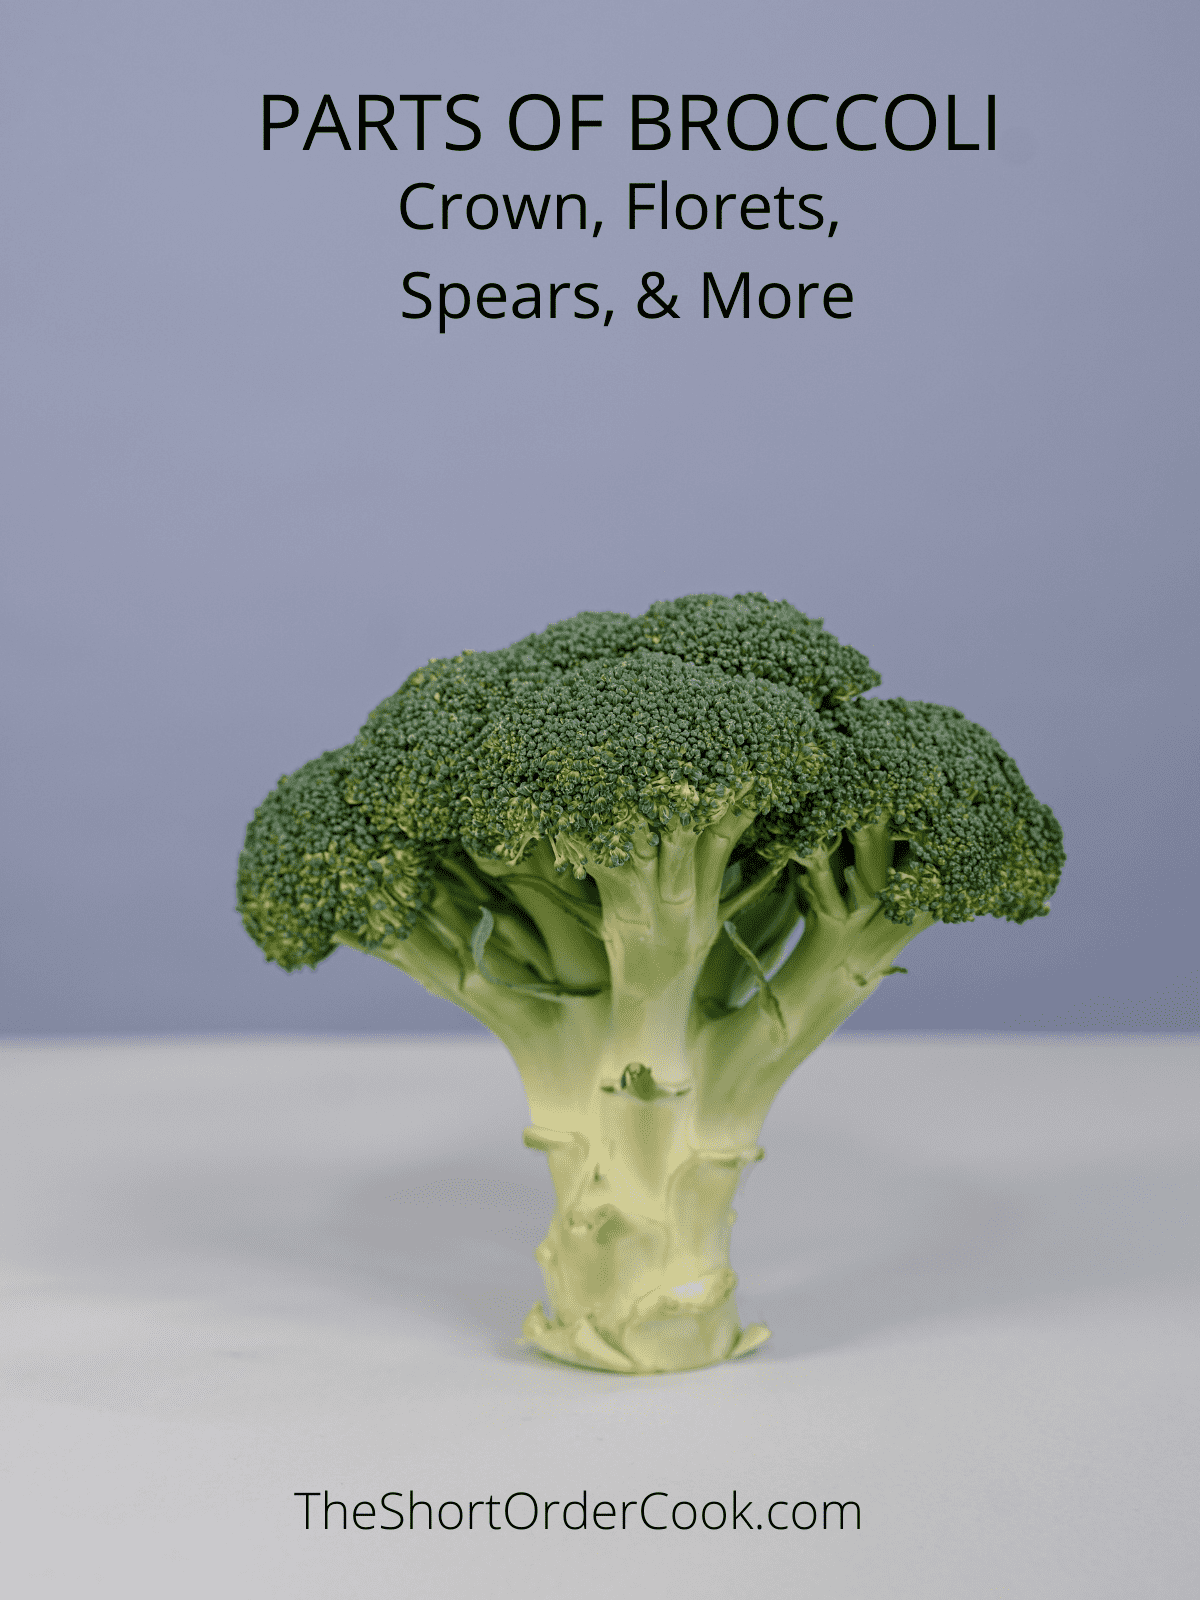 What is a Spear of Broccoli?